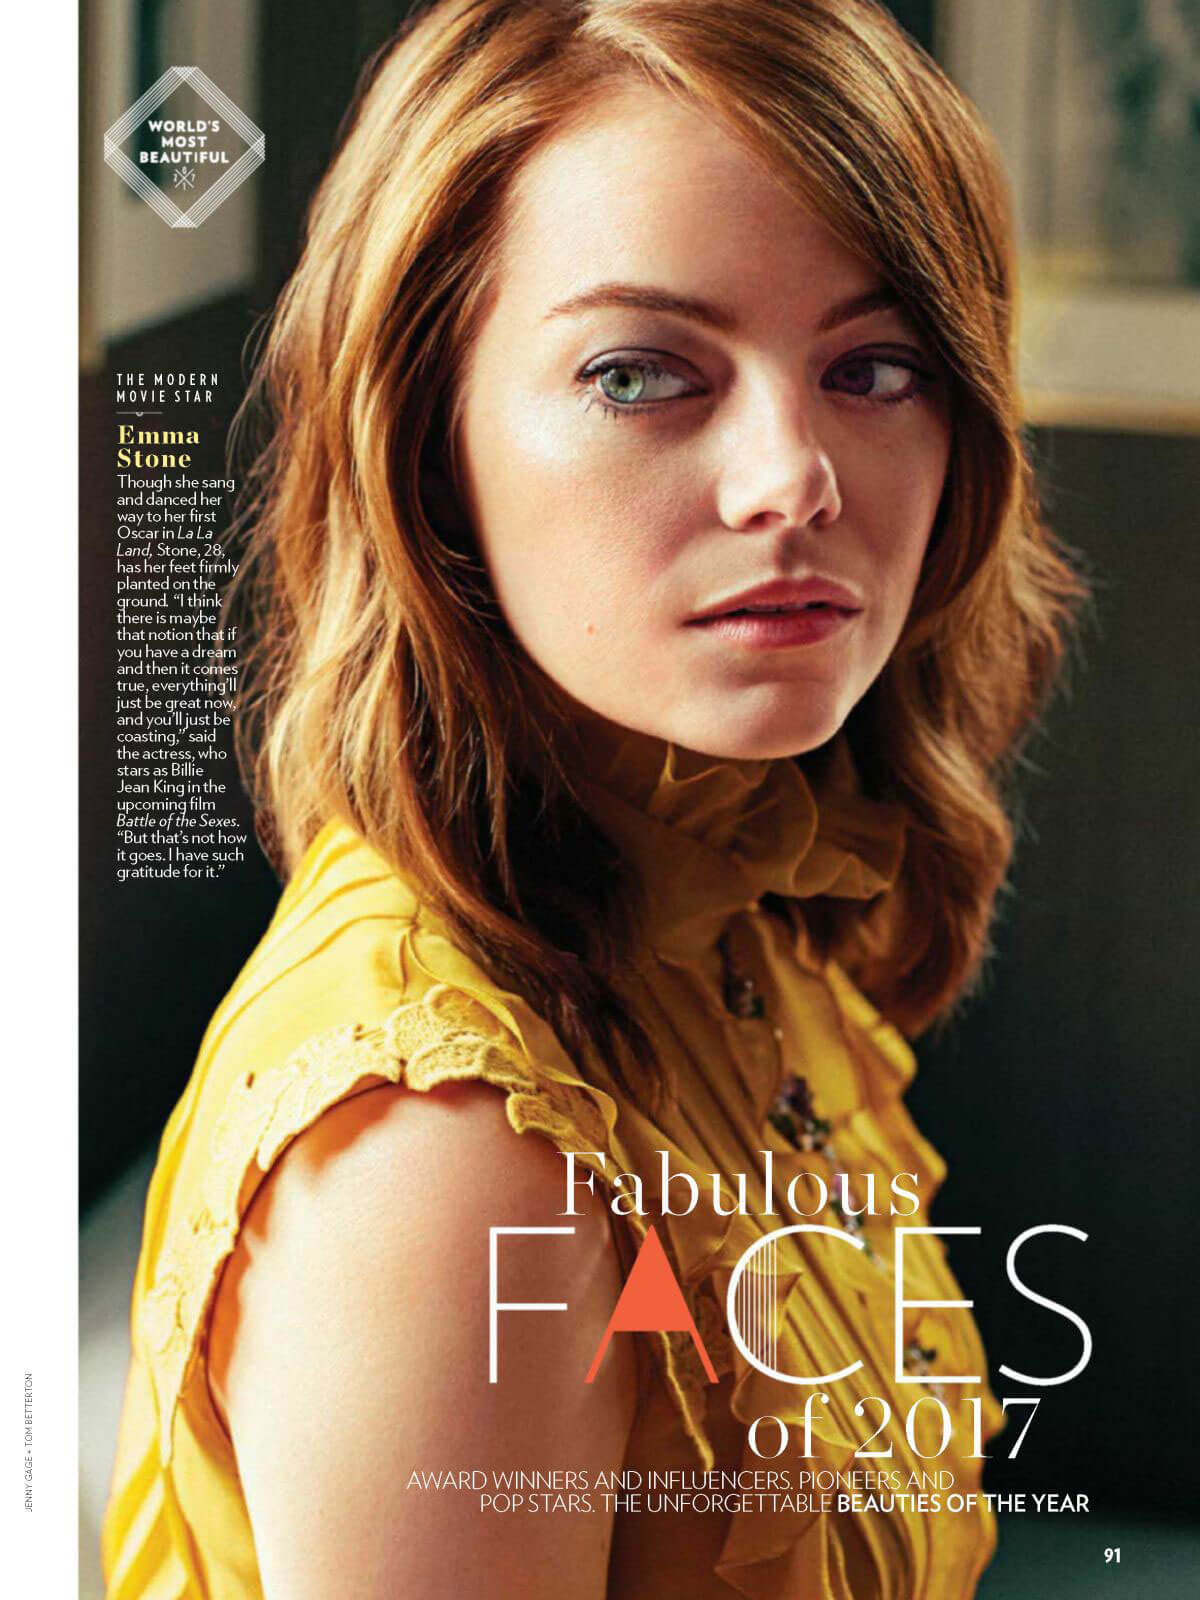 Emma Stone Cover Photoshoot in People Magazine, May 2017